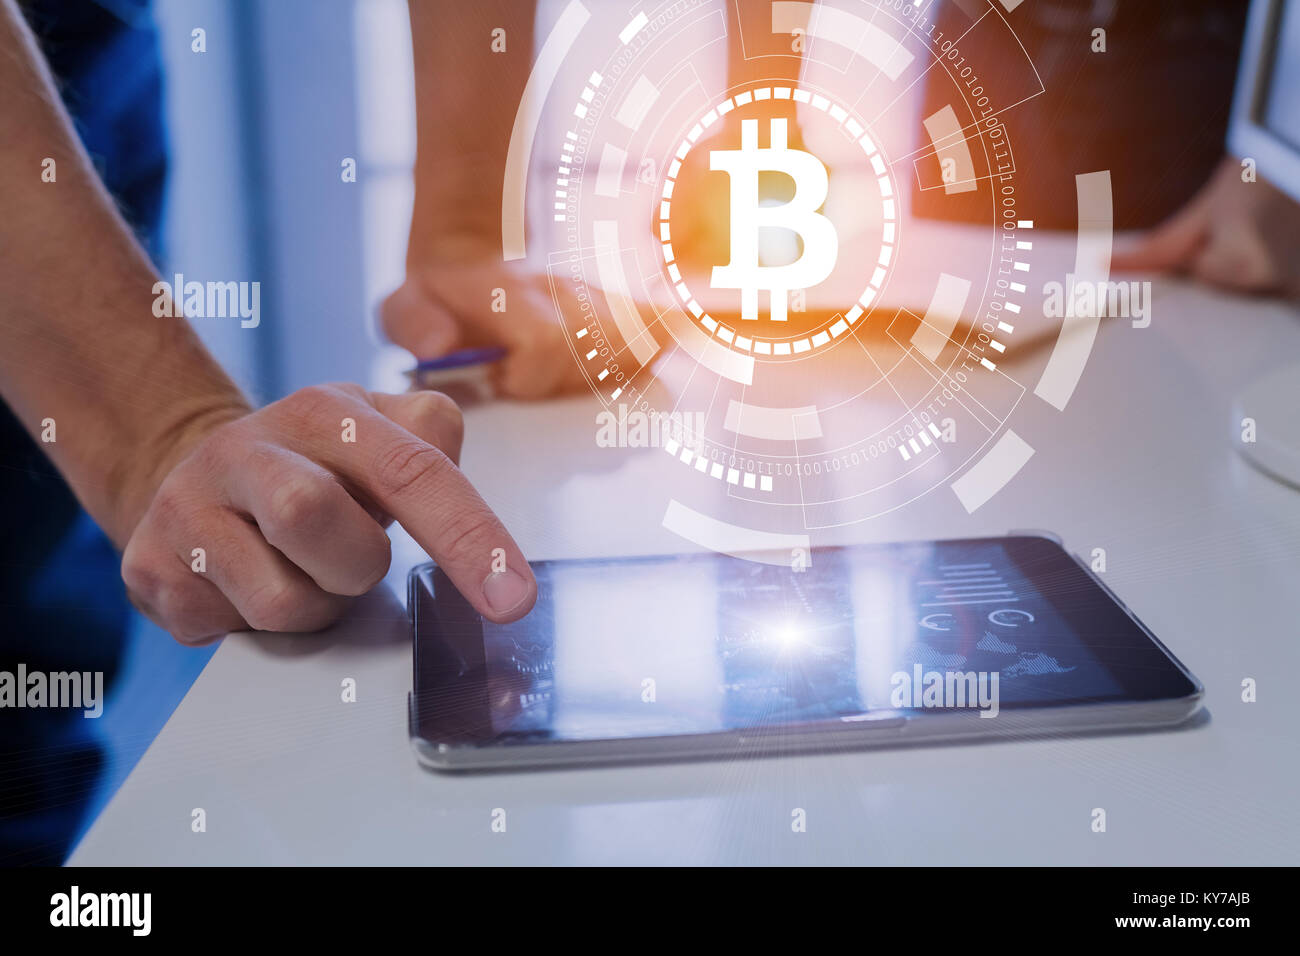 Team of financial people trading, investing or paying with bitcoin cryptocurrency technology, BTC currency symbol on virtual interface, digital tablet Stock Photo